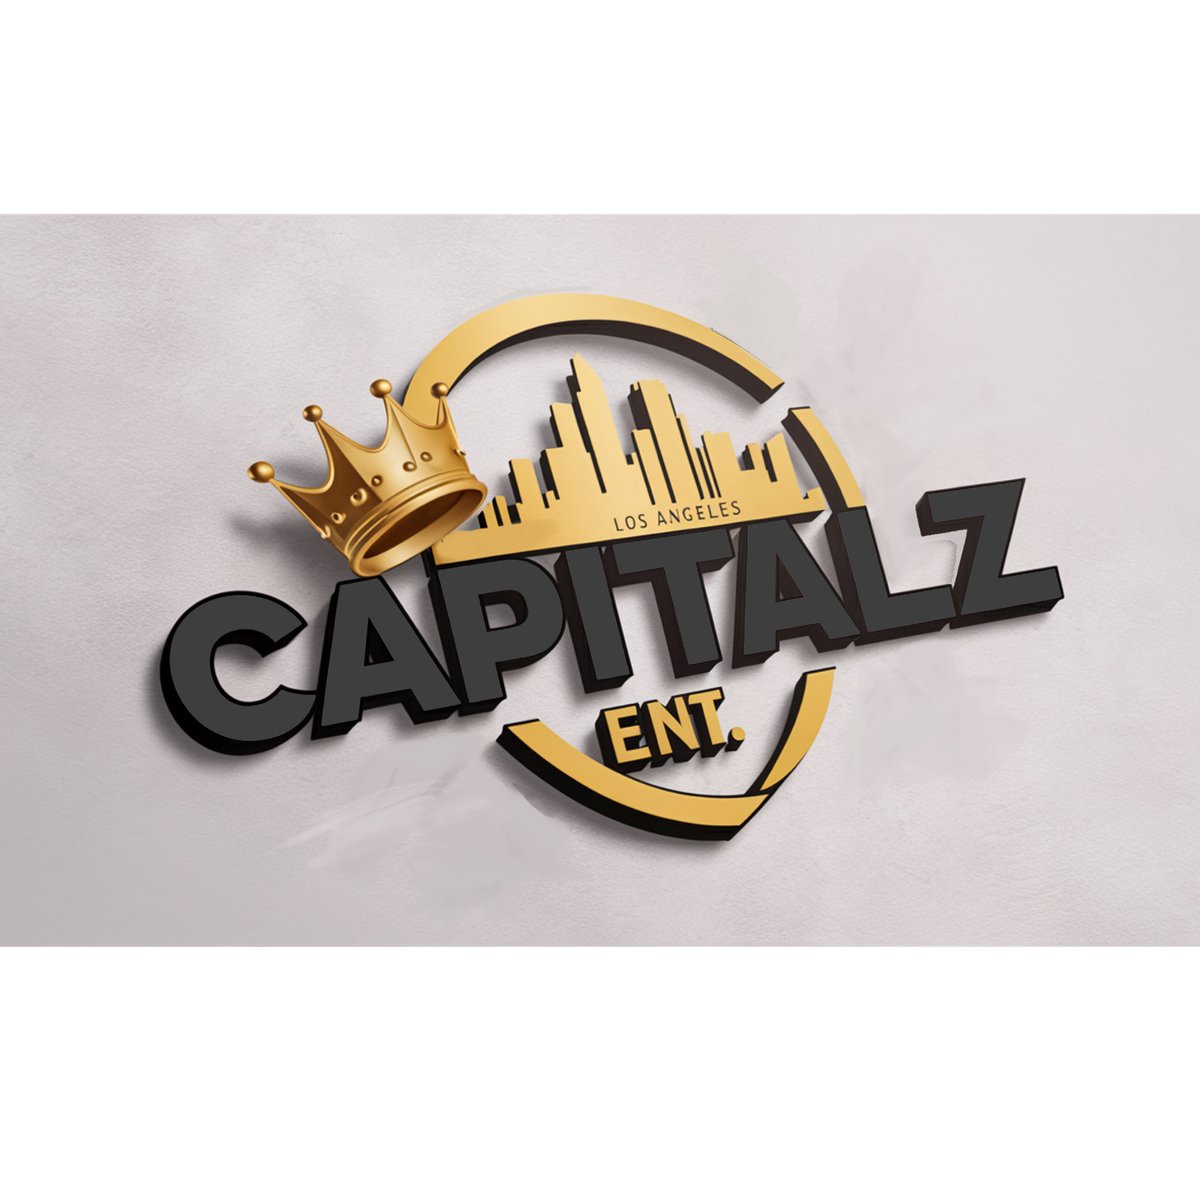 Made a few logos for the bro today. 
#CapitalzEnt #SouthCentral #LosAngeles